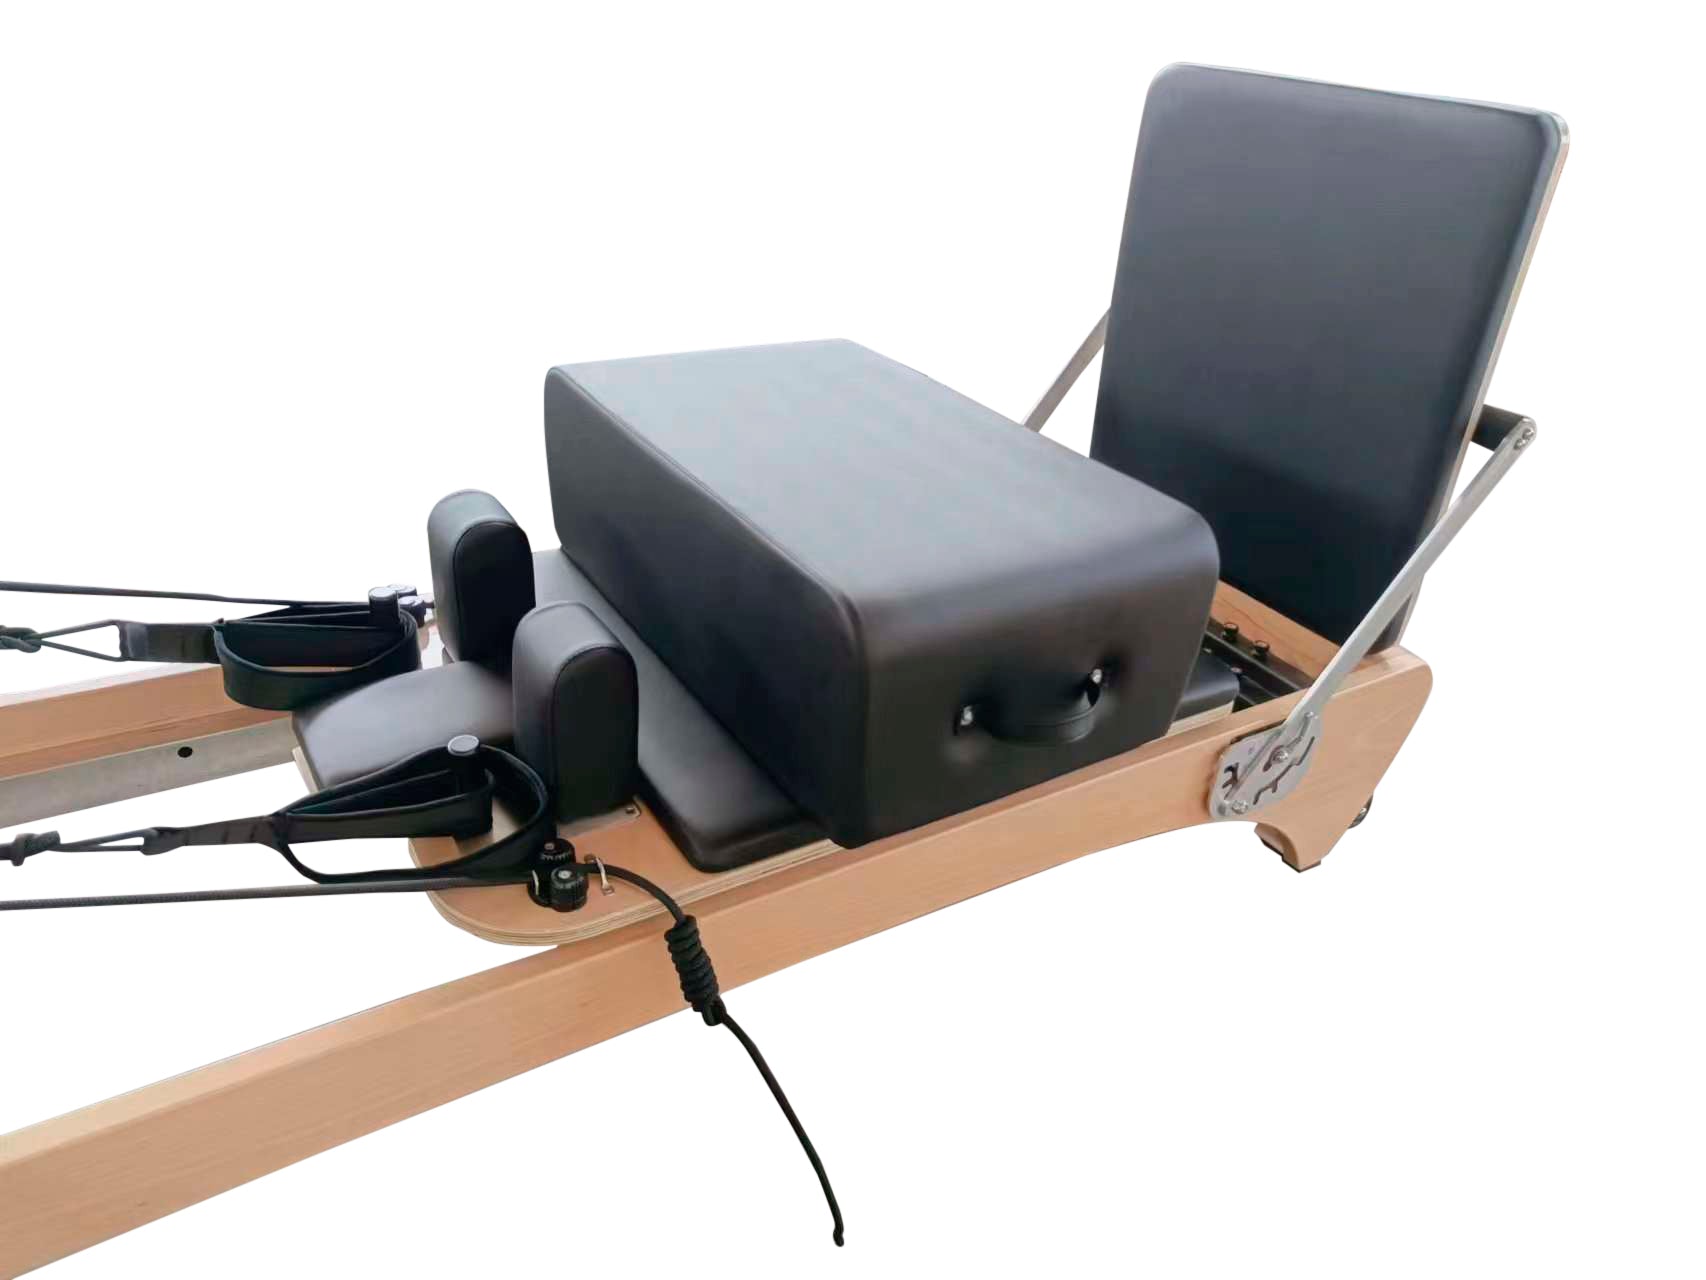 Curved Design Studio Pilates Reformer Bed - Etoile - Personal Hour for Yoga and Meditations 